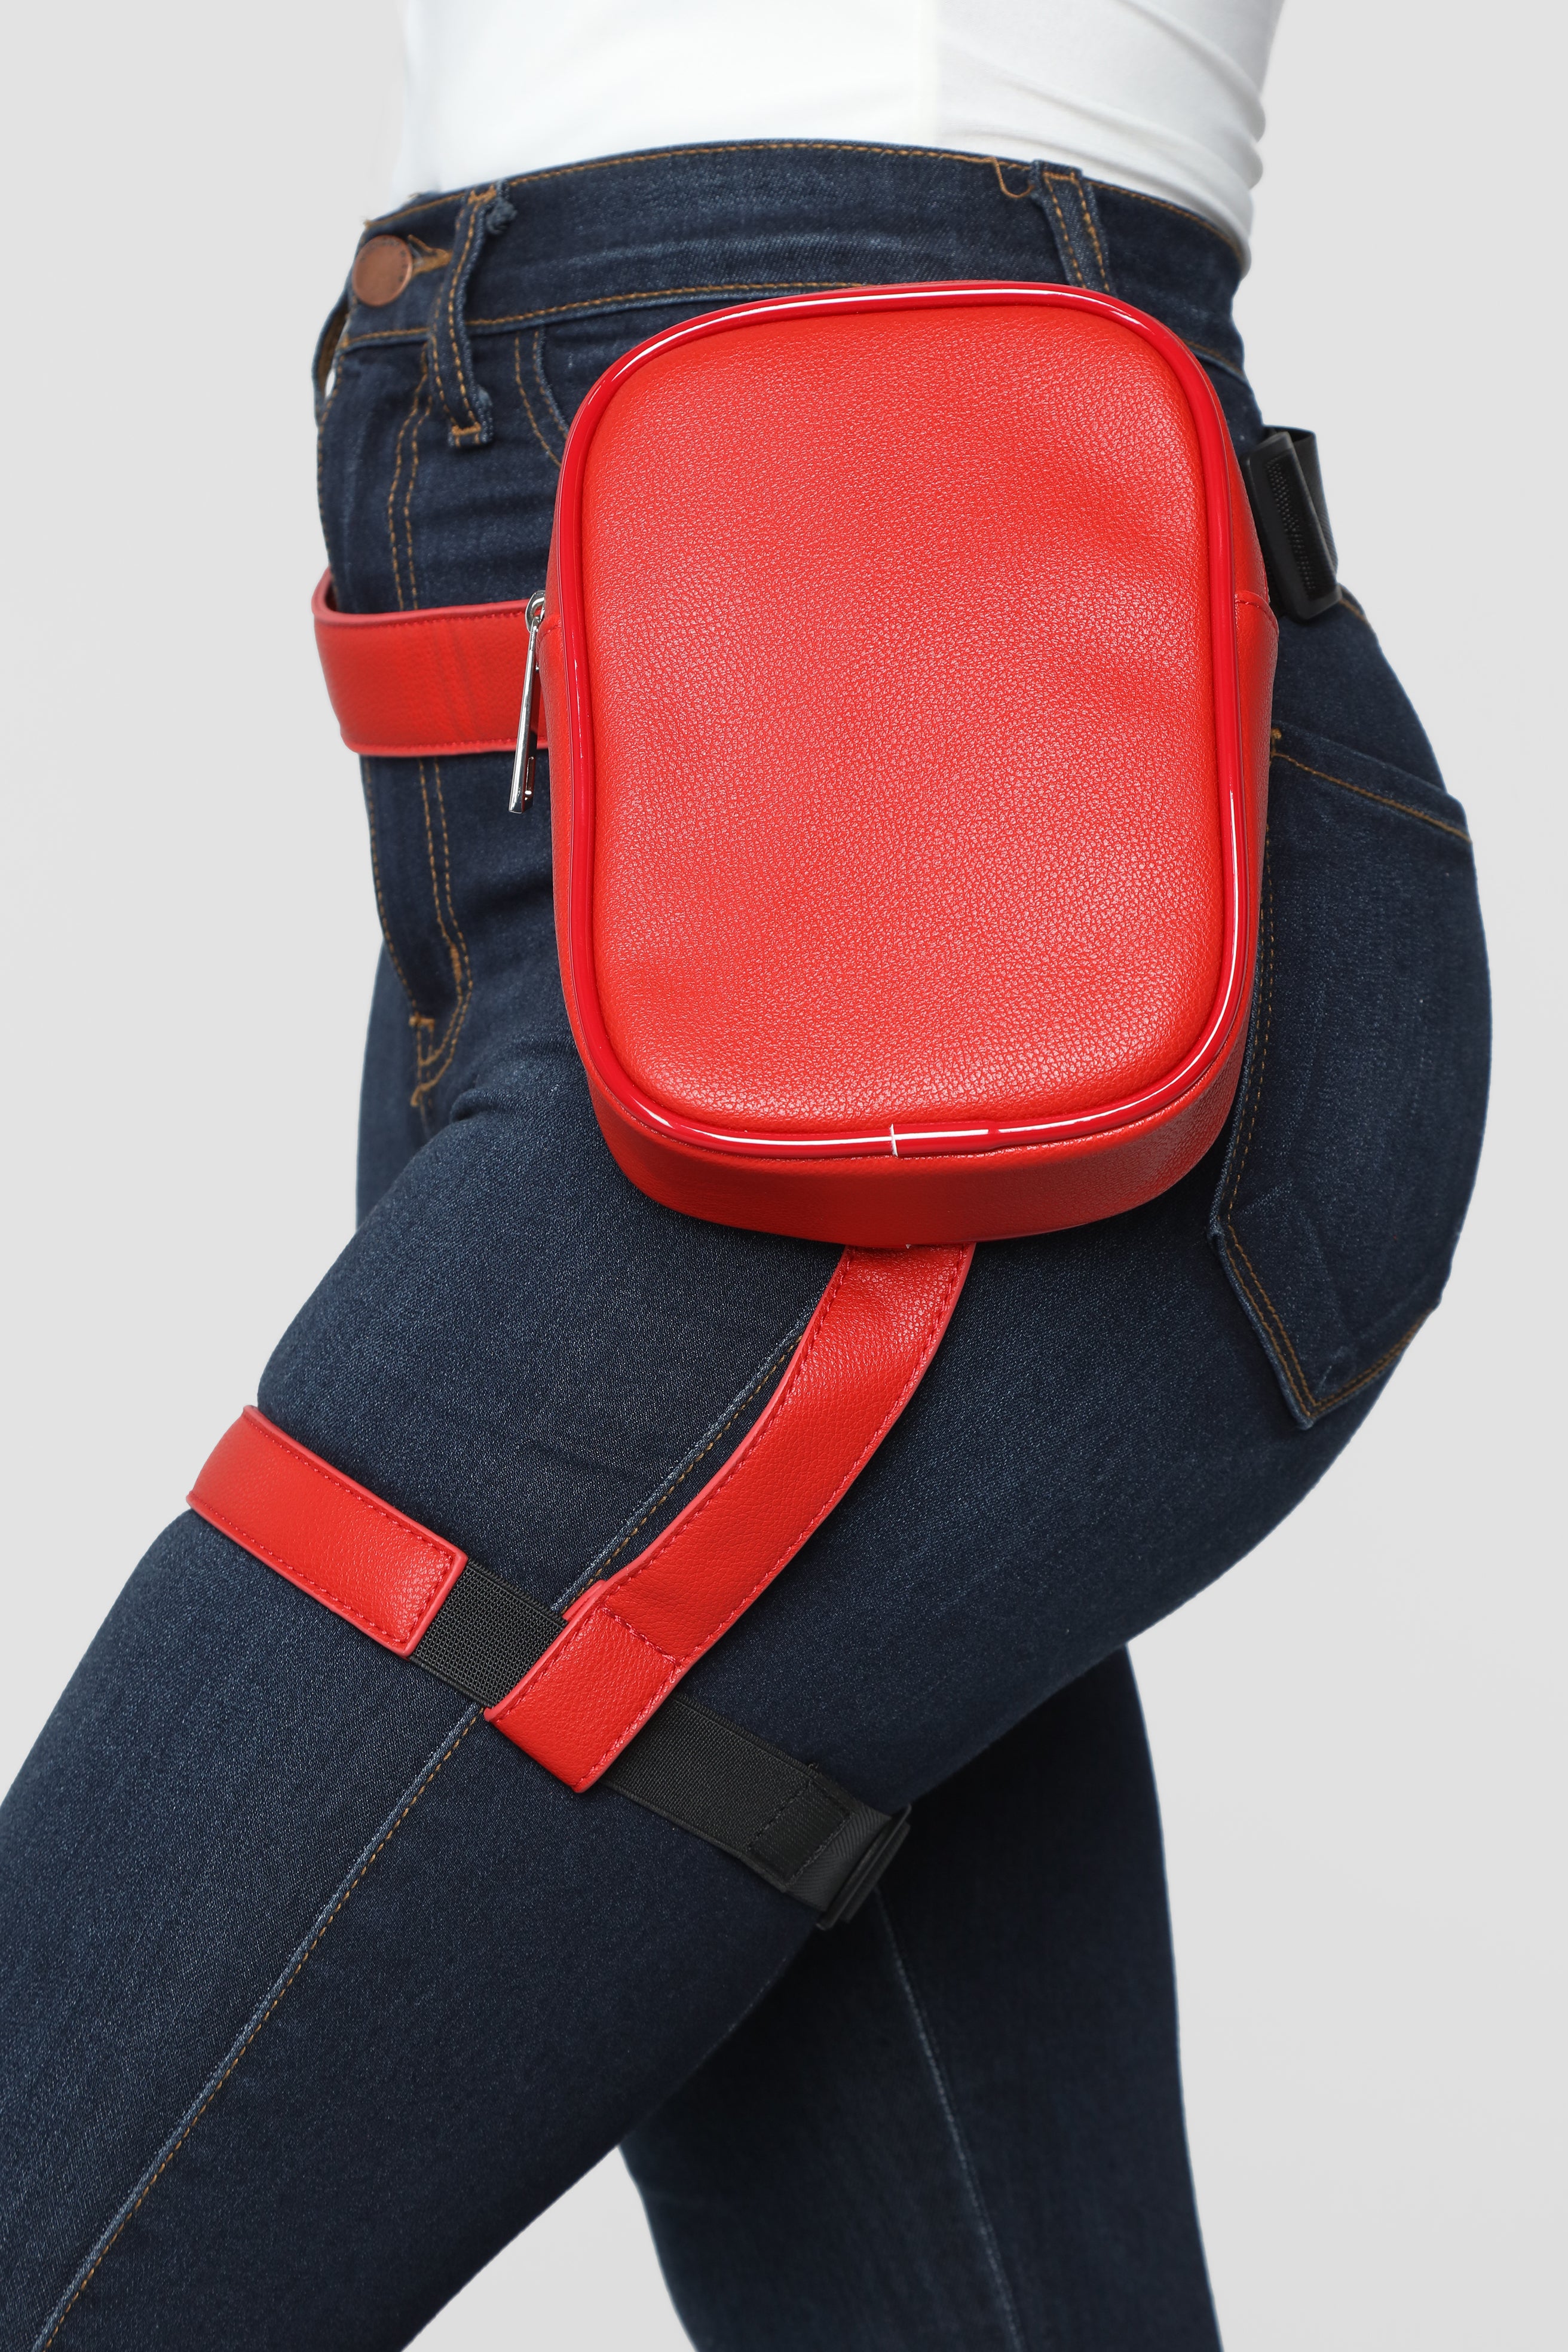 red fanny pack